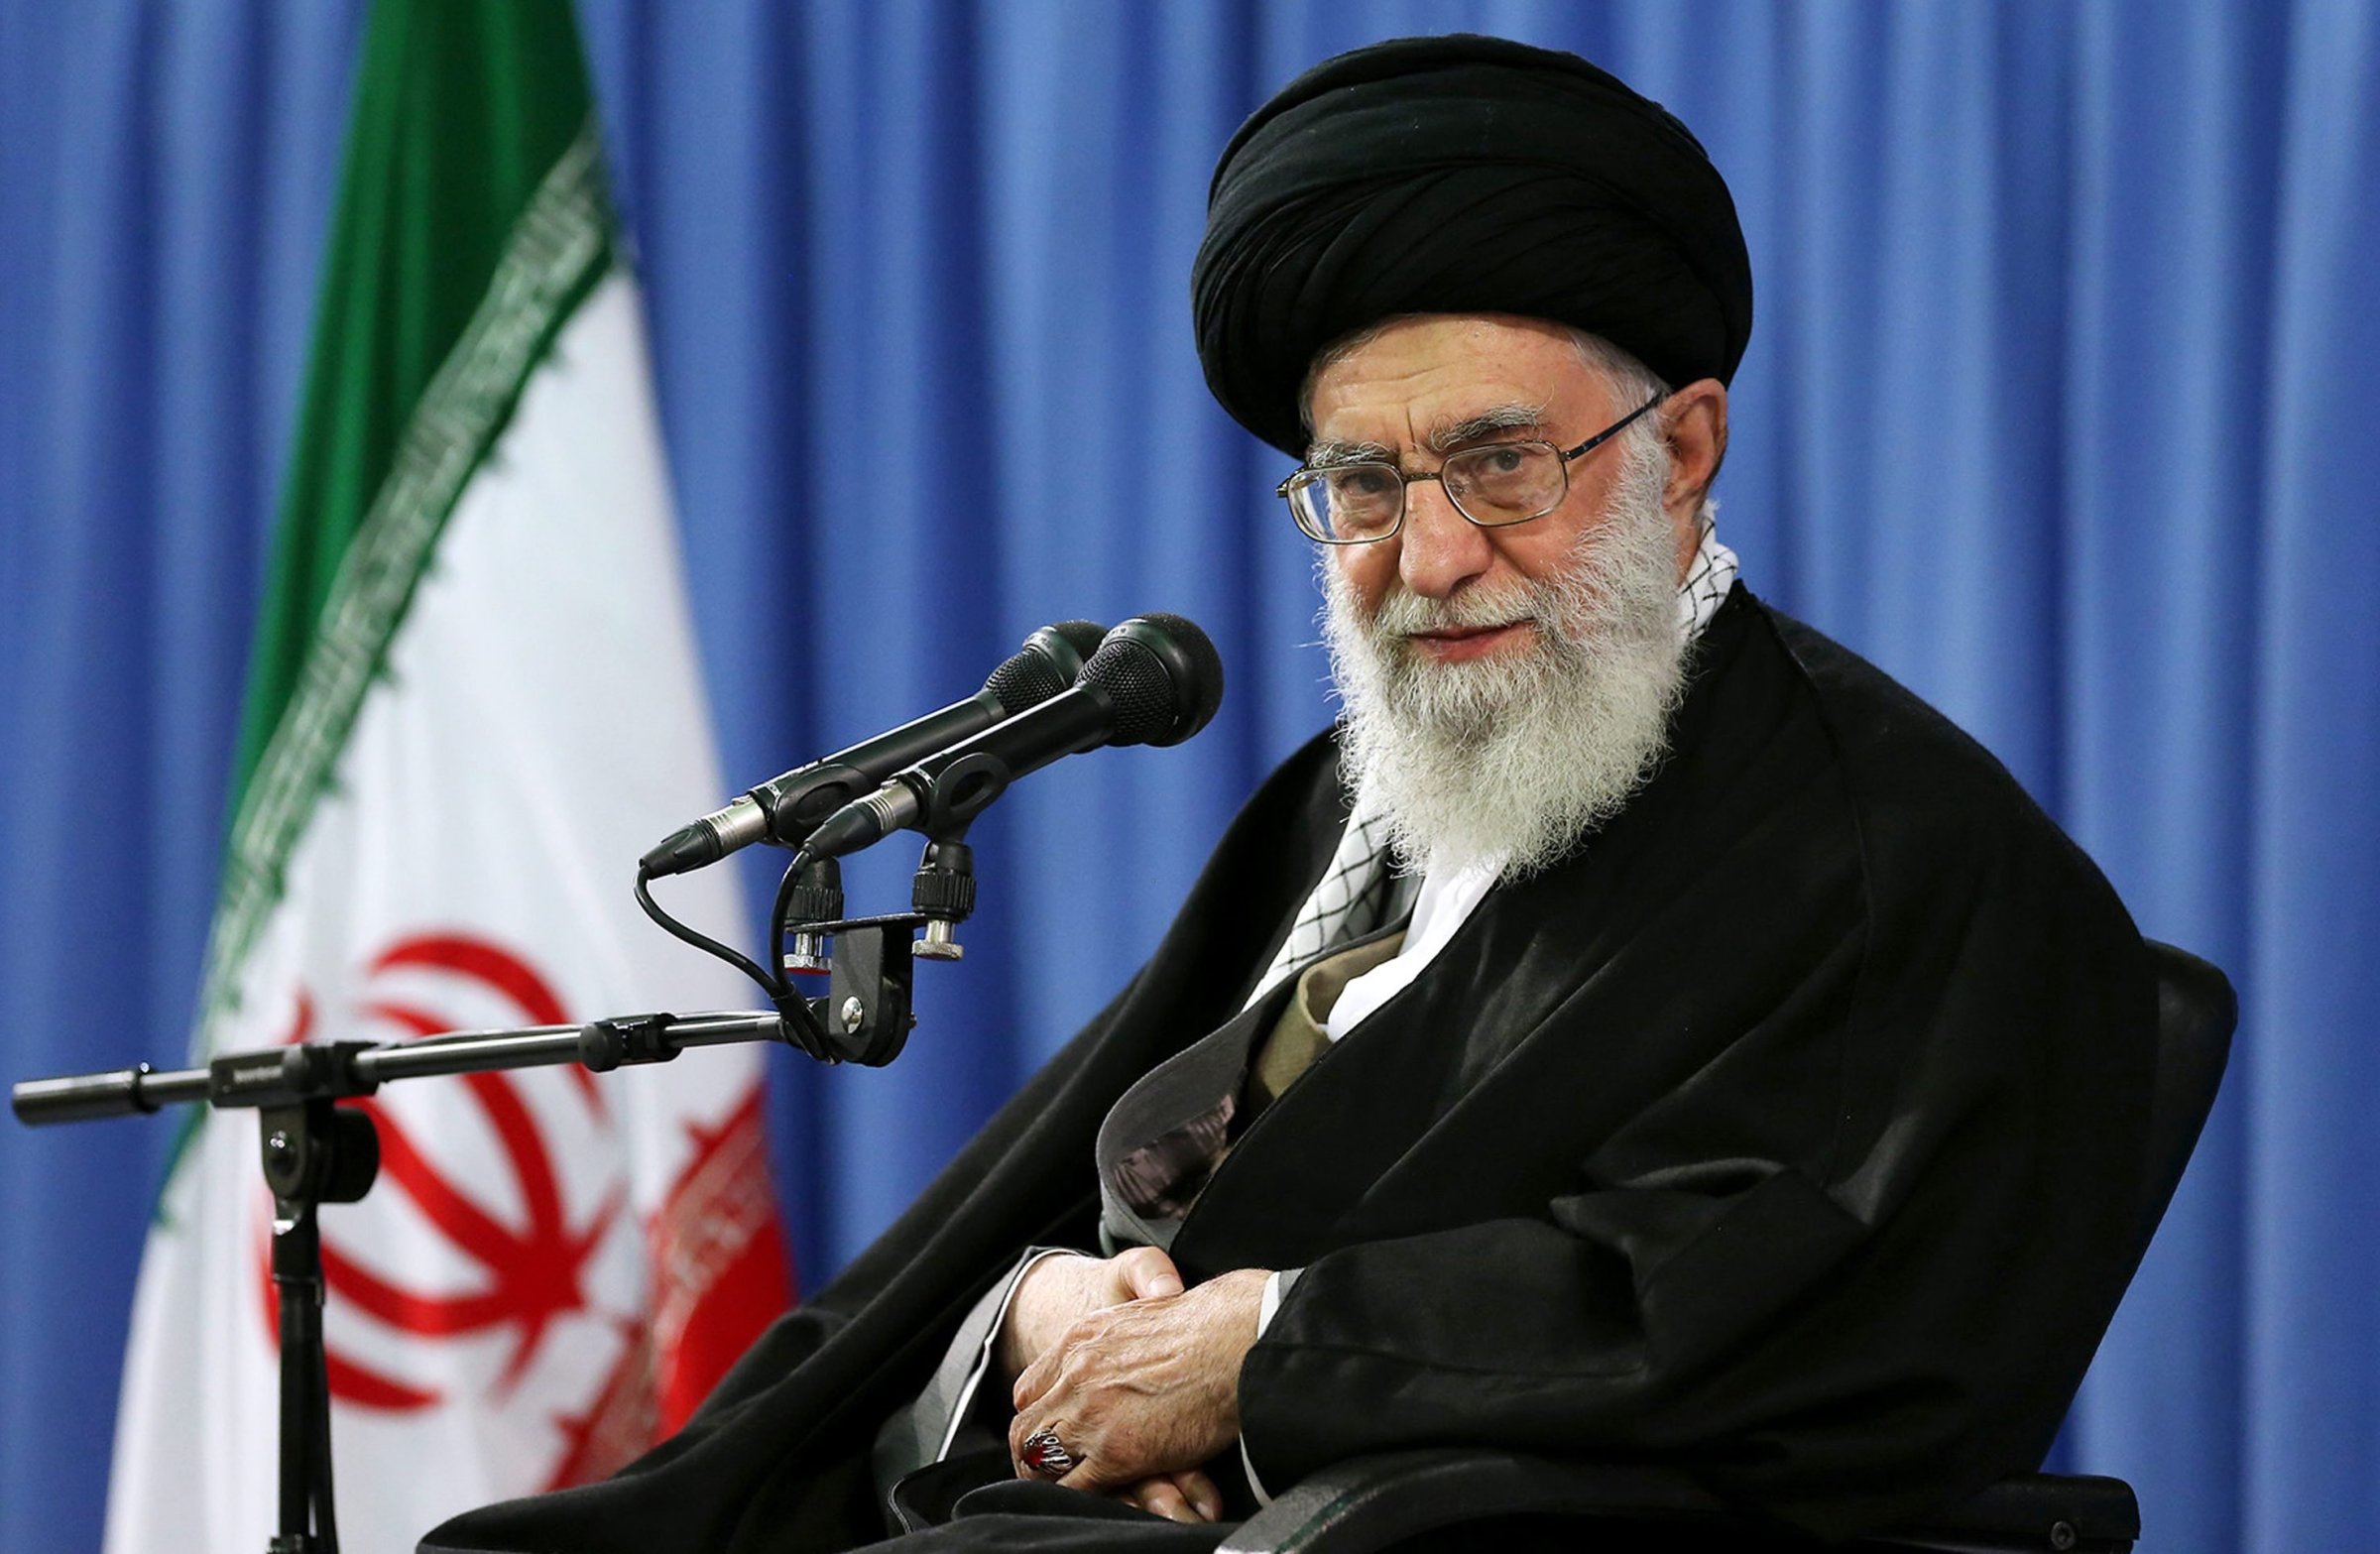 Supreme Leader, Ayatollah Ali Khamenei, speaking to crowds during a ceremony in Tehran on April 9, 2015.